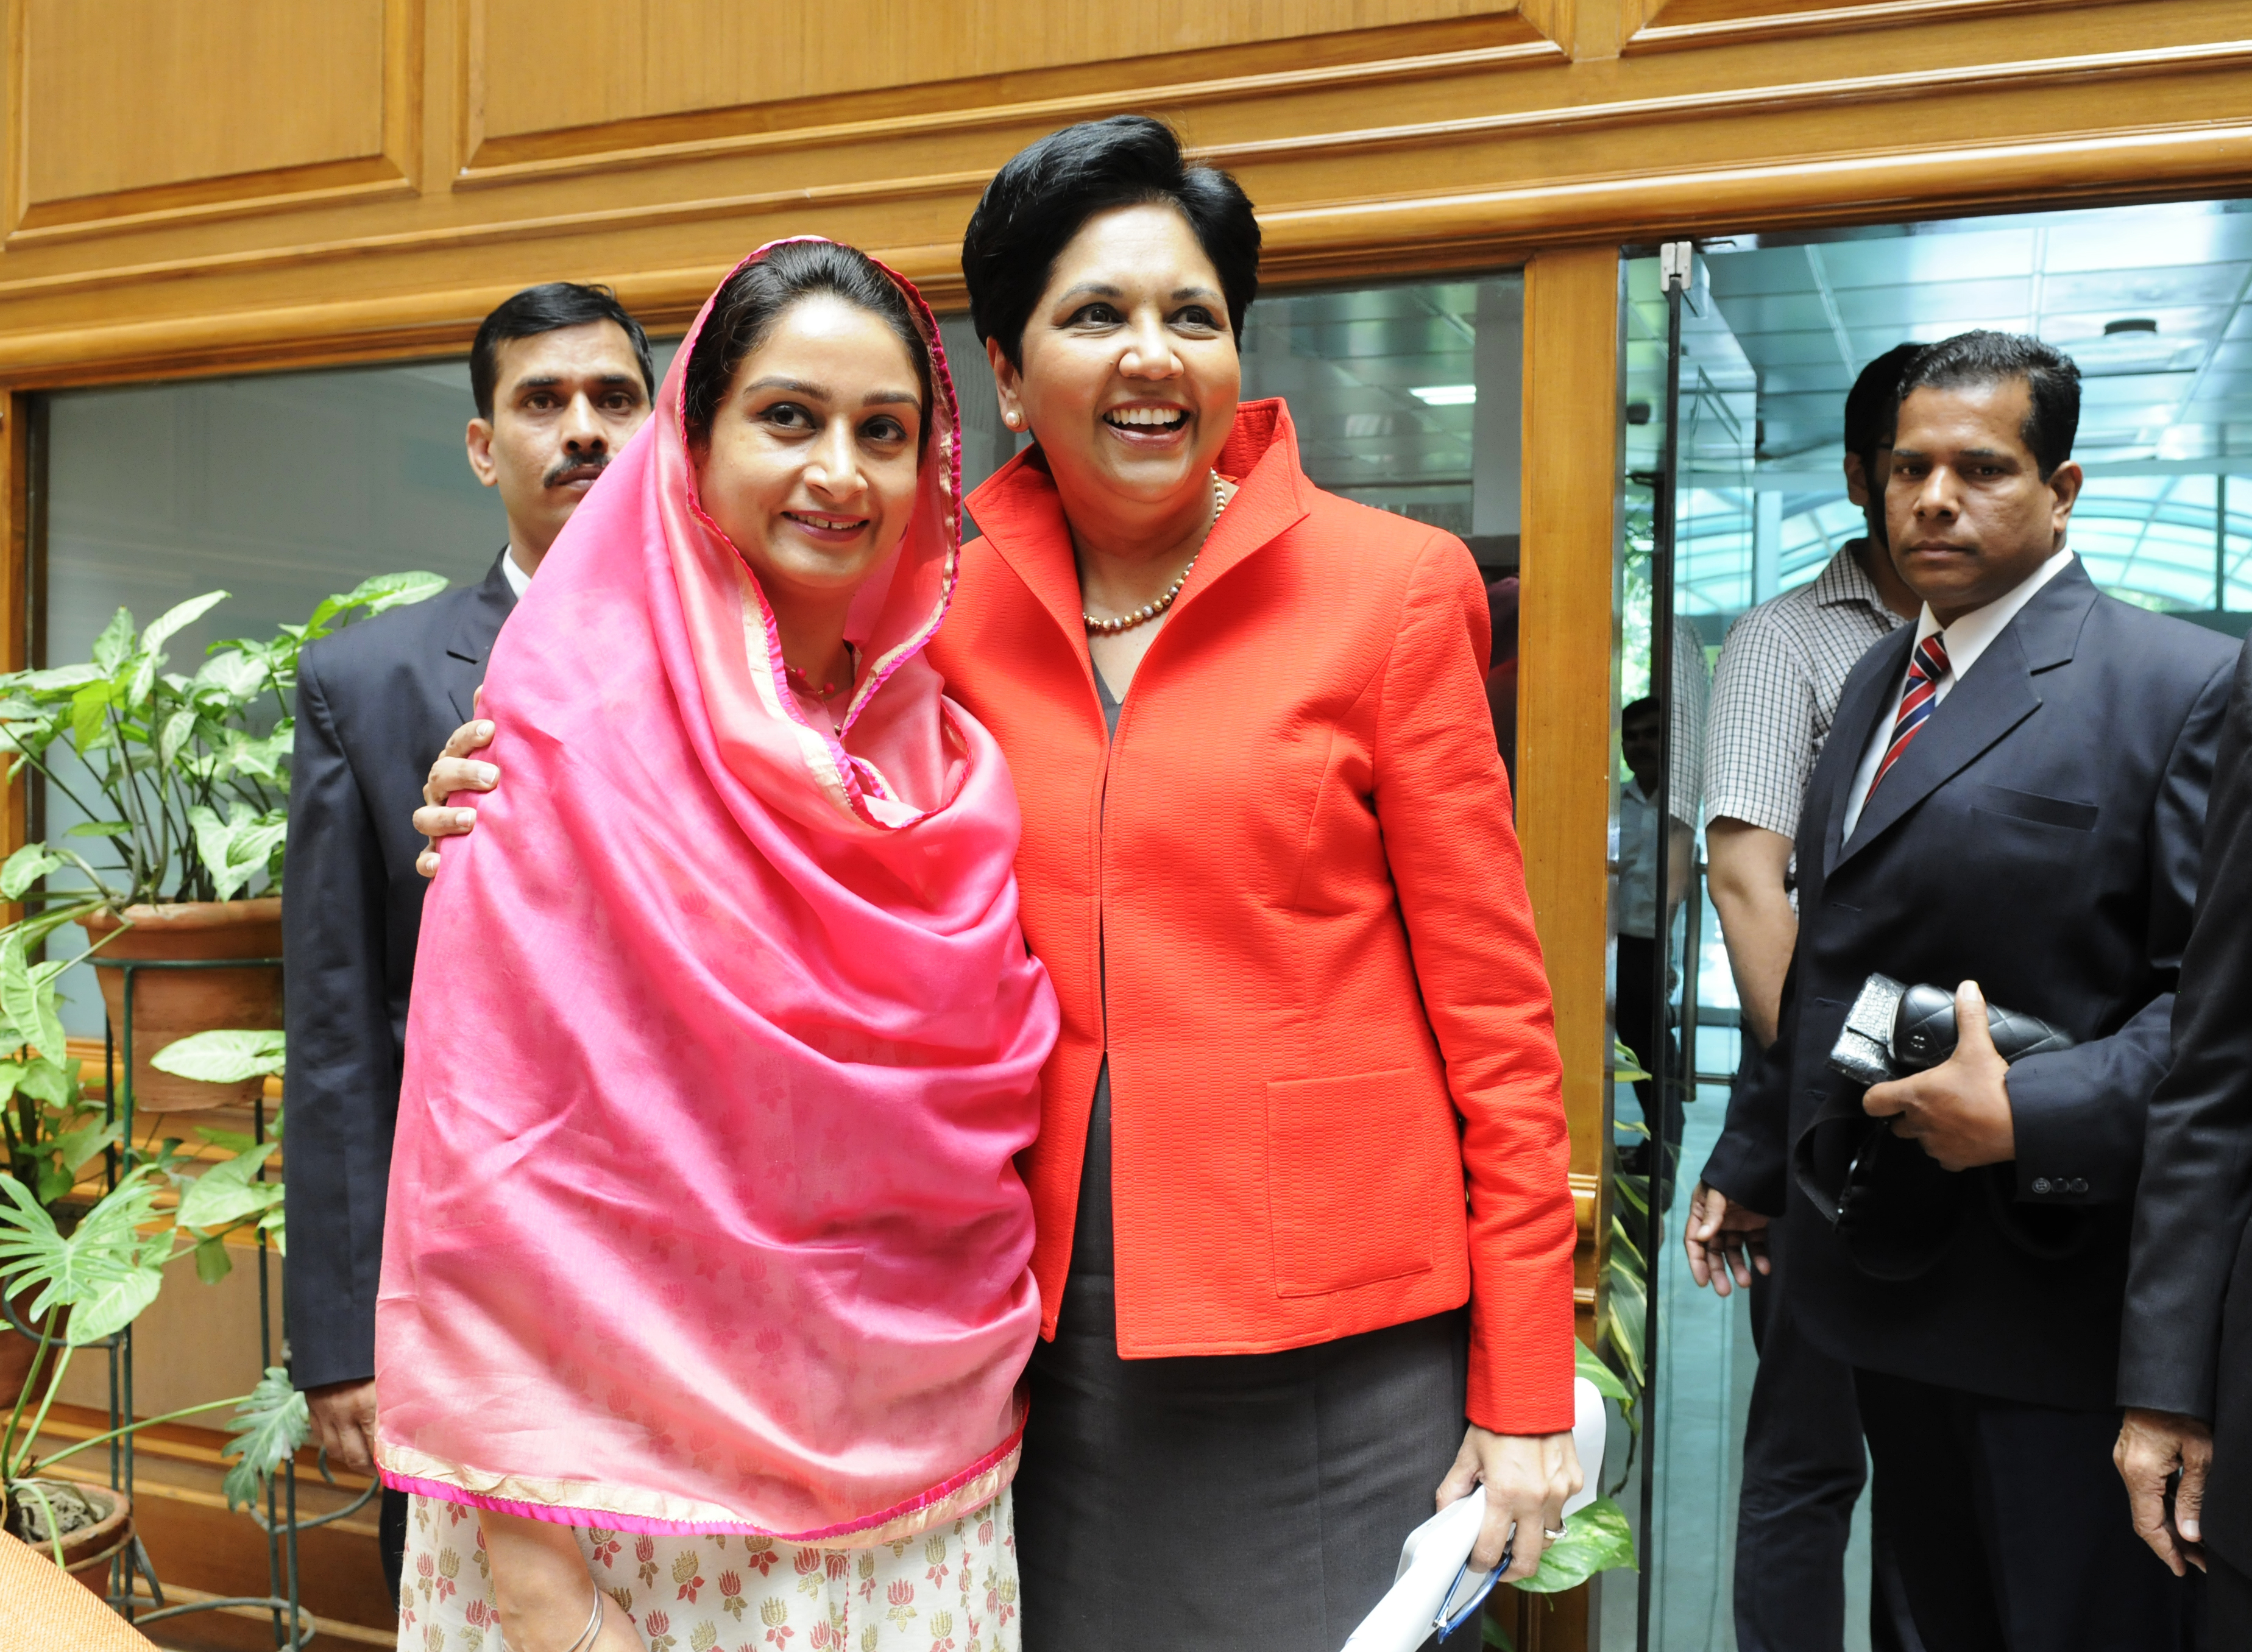 PepsiCo CEO Indra Nooyi, right, meets Food Processing Minister Harsimrat Kaur Badal in New Delhi on Aug. 26, 2014 (Saumya Khandelwal—Hindustan Times/Getty Images)